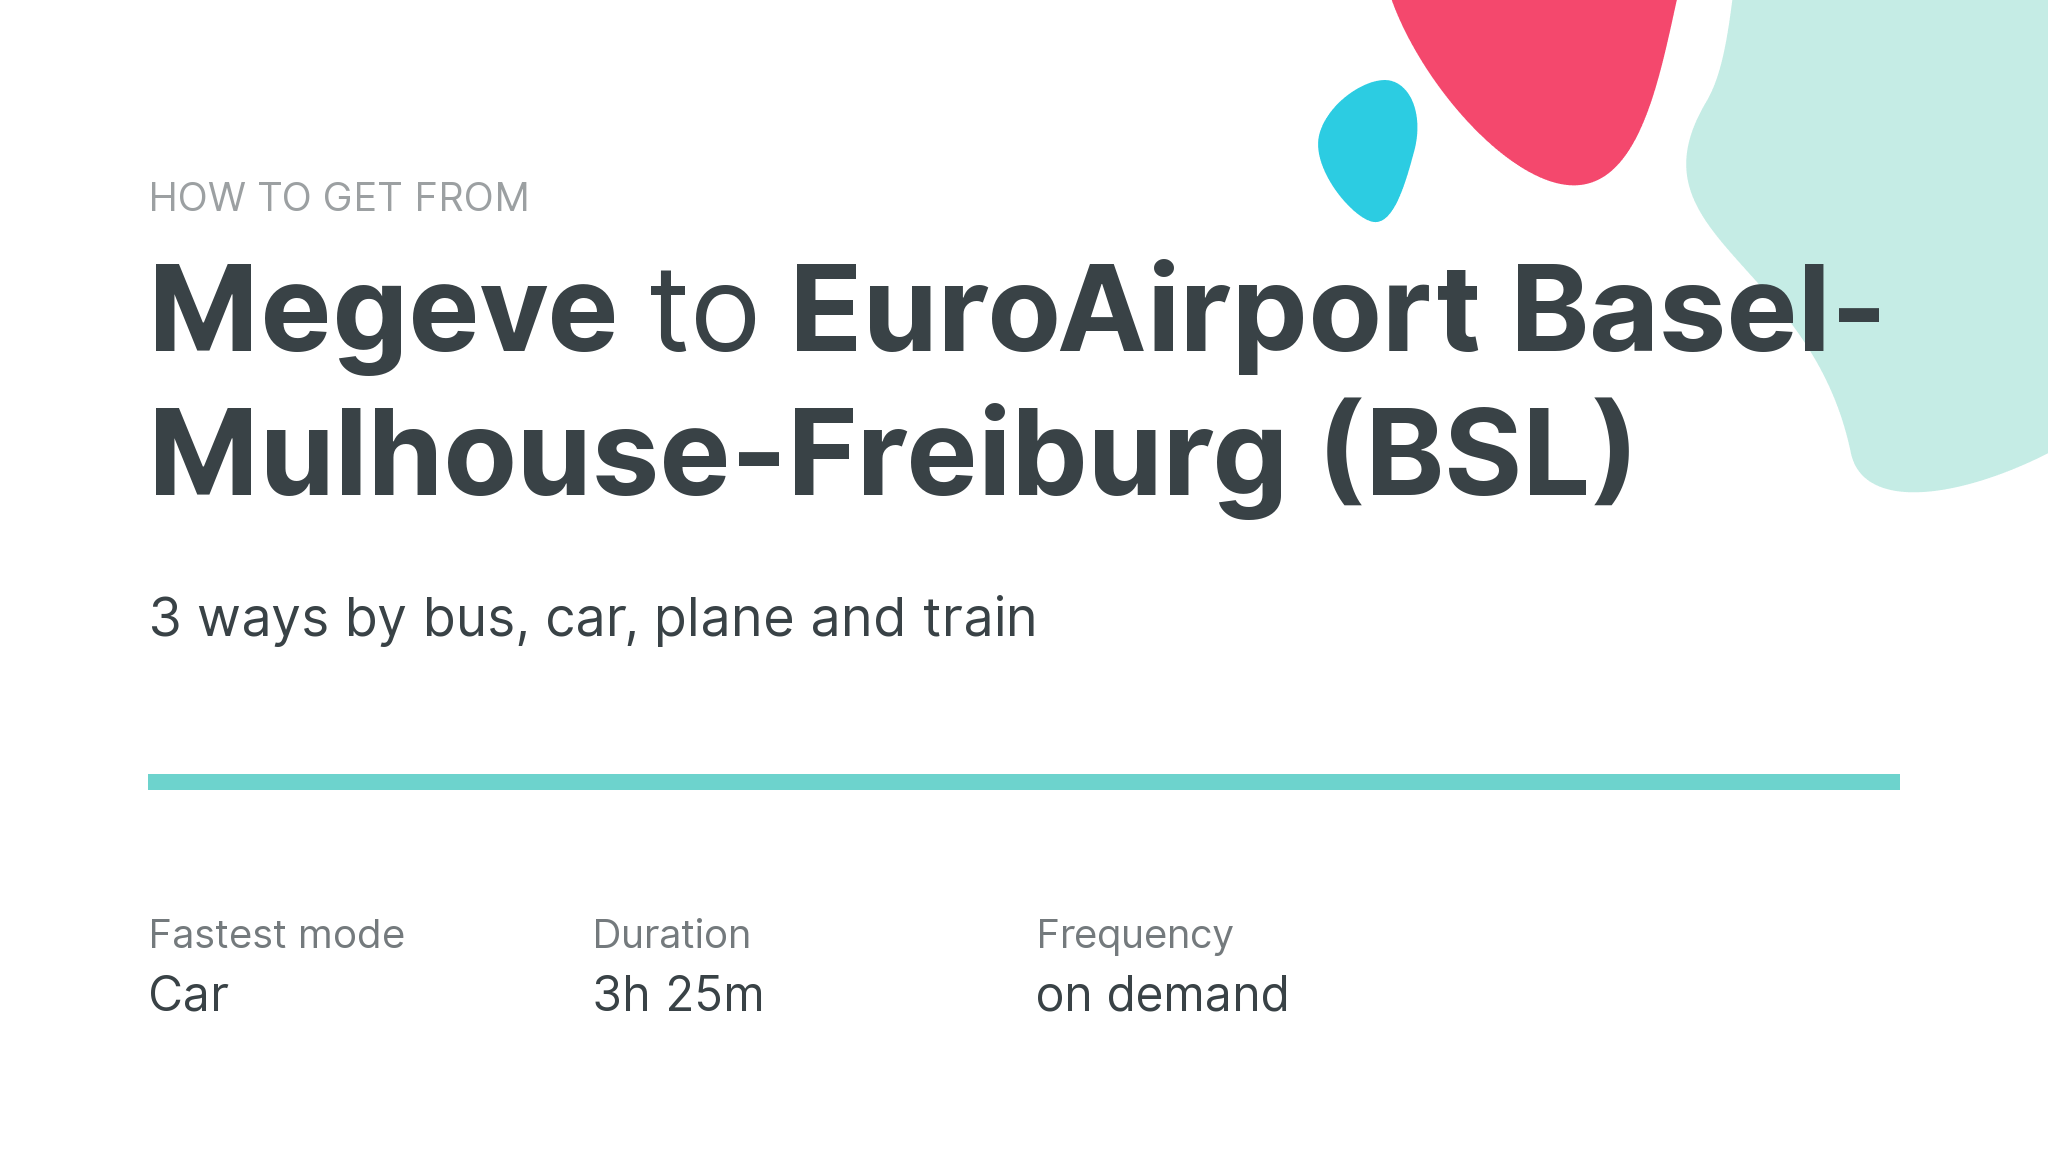 How do I get from Megeve to EuroAirport Basel-Mulhouse-Freiburg (BSL)